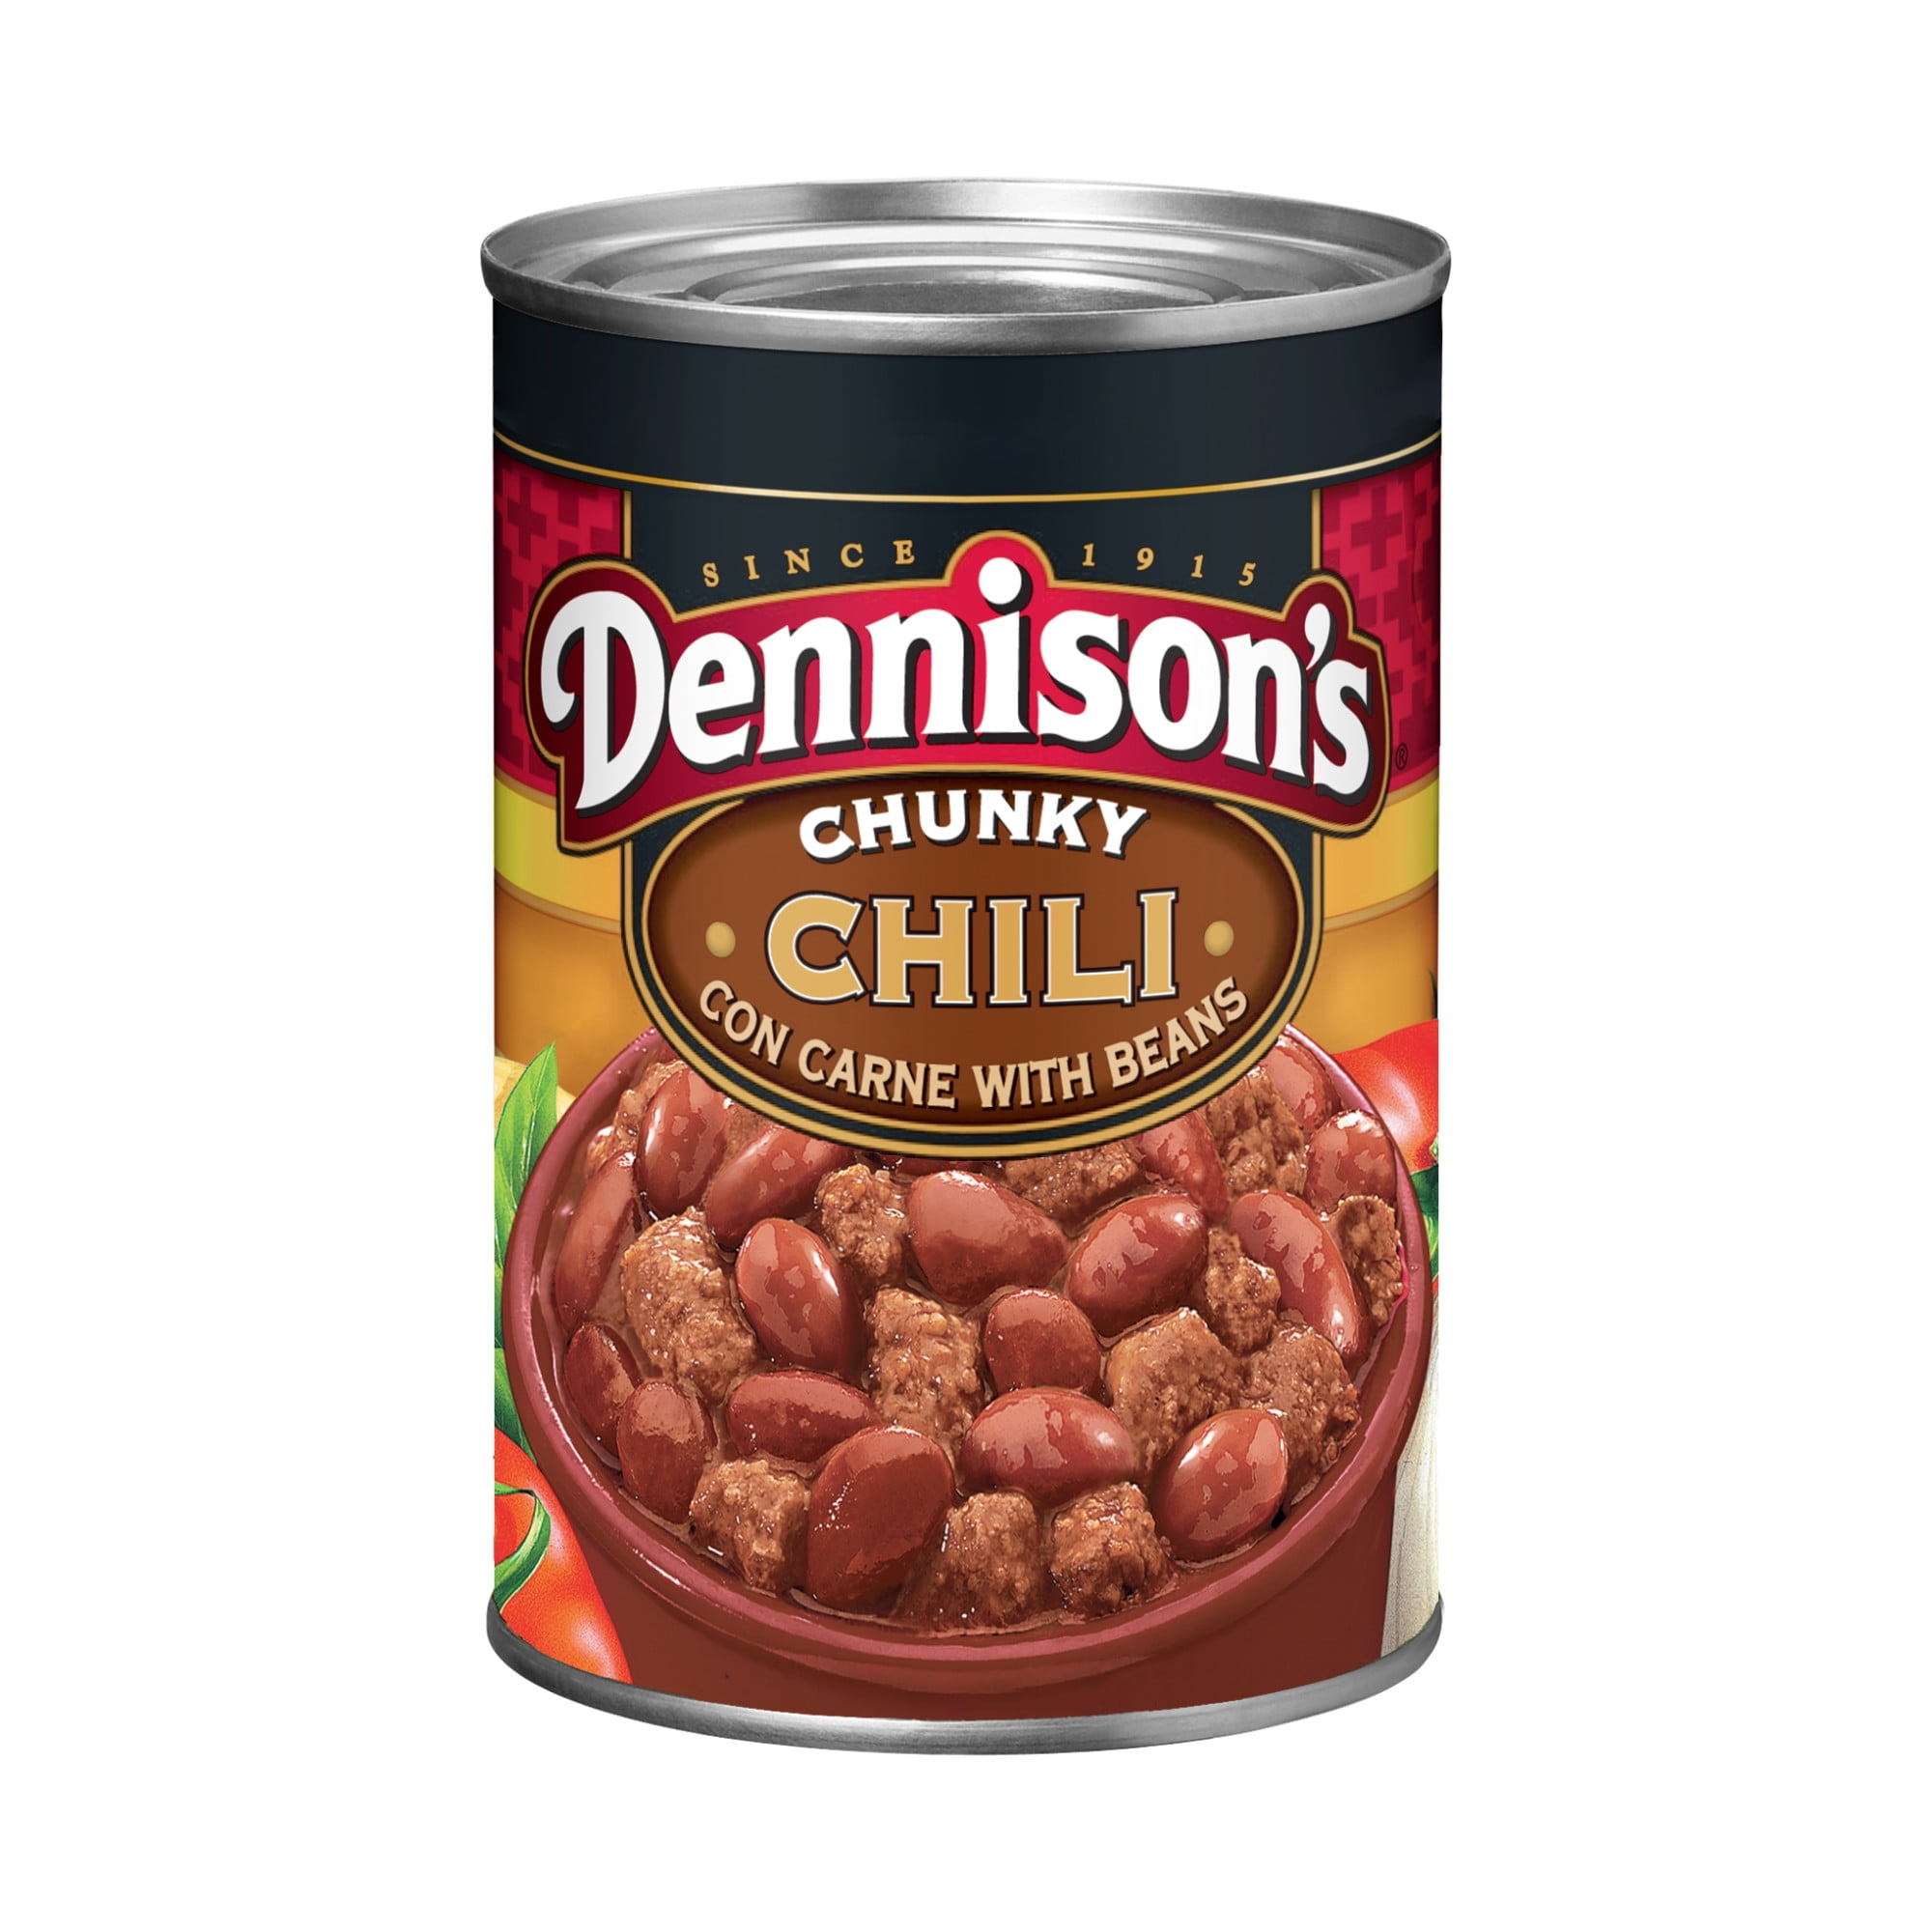 Dennison's Chunky Chili Con Carne with Beans, Canned Chili, 15 oz ...